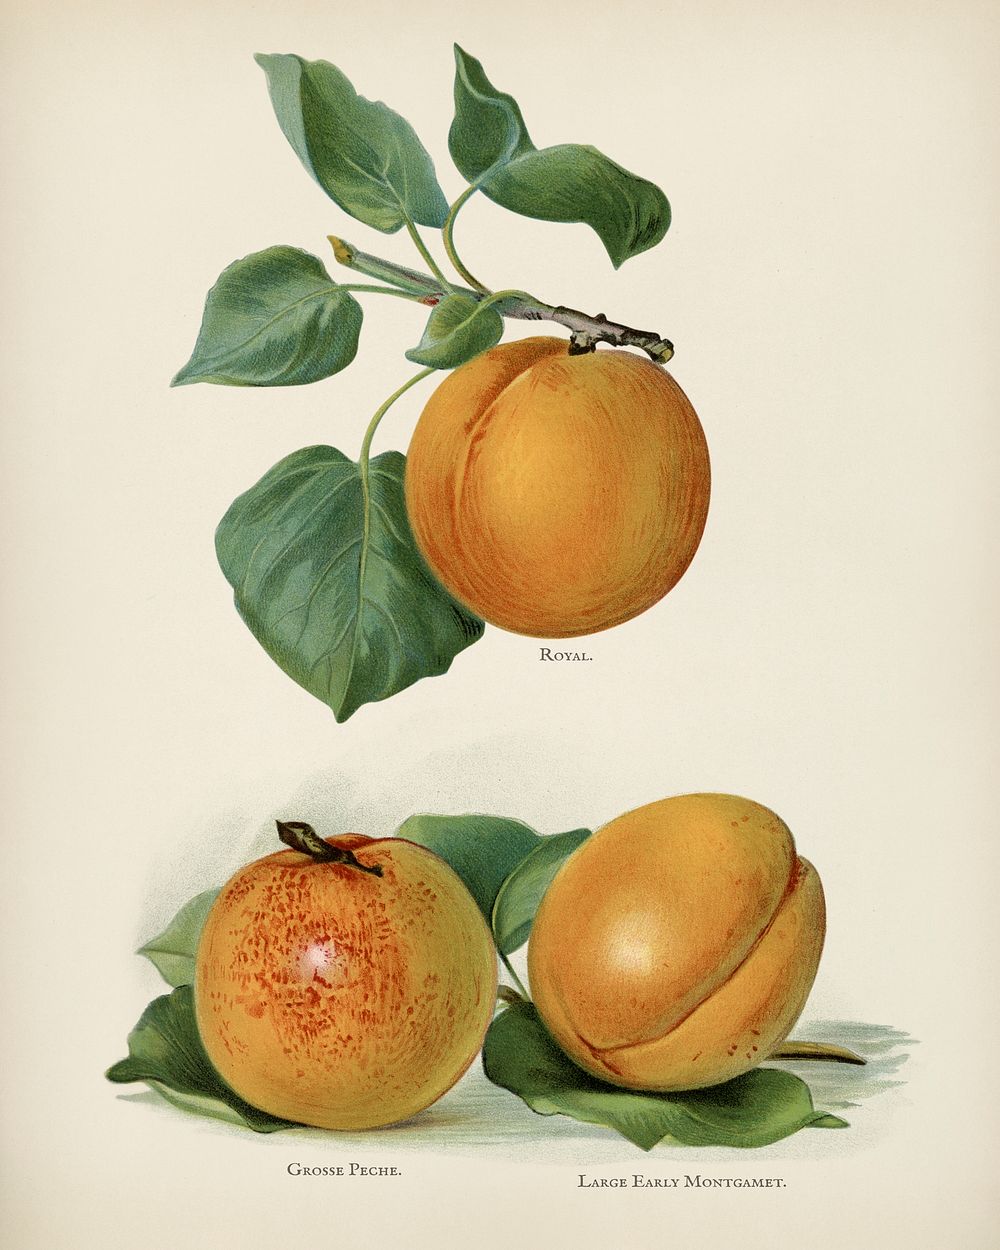 The fruit grower's guide : Vintage illustration of apricots